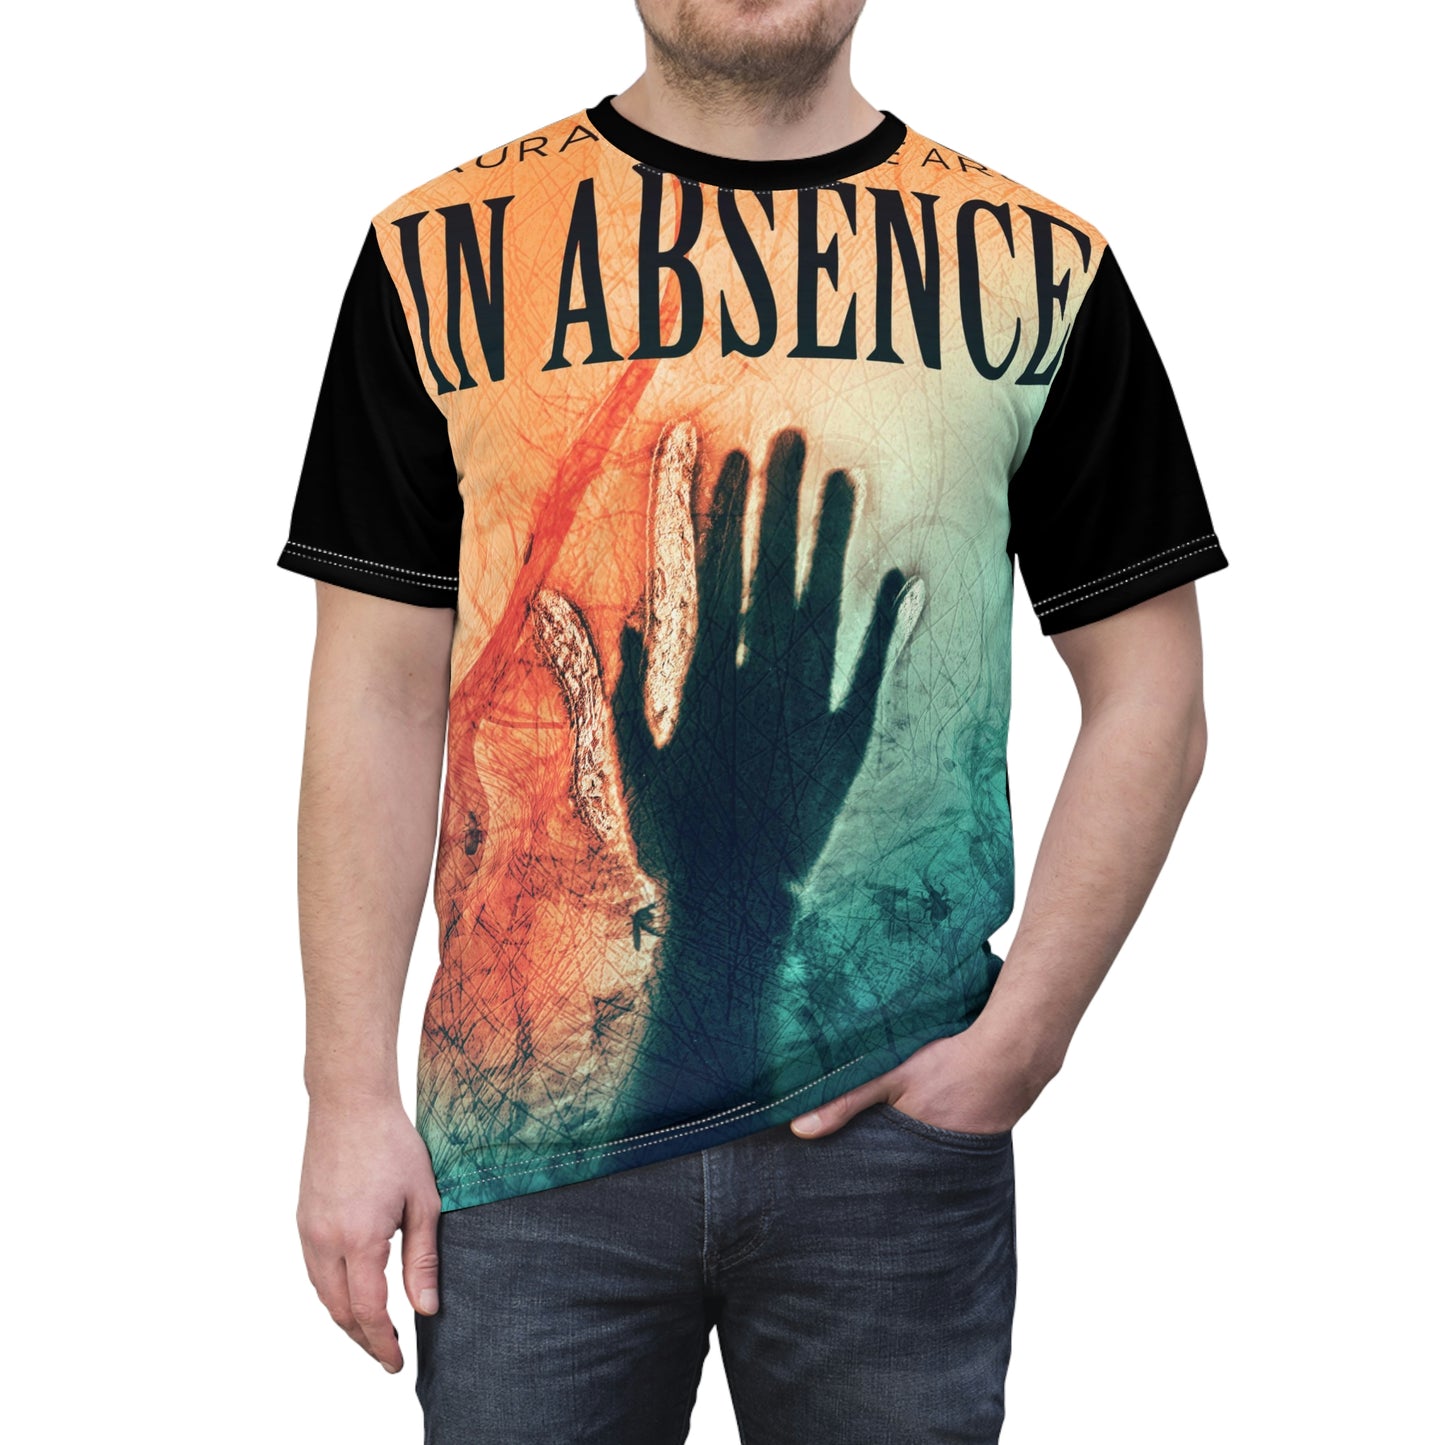 In Absence - Unisex All-Over Print Cut & Sew T-Shirt